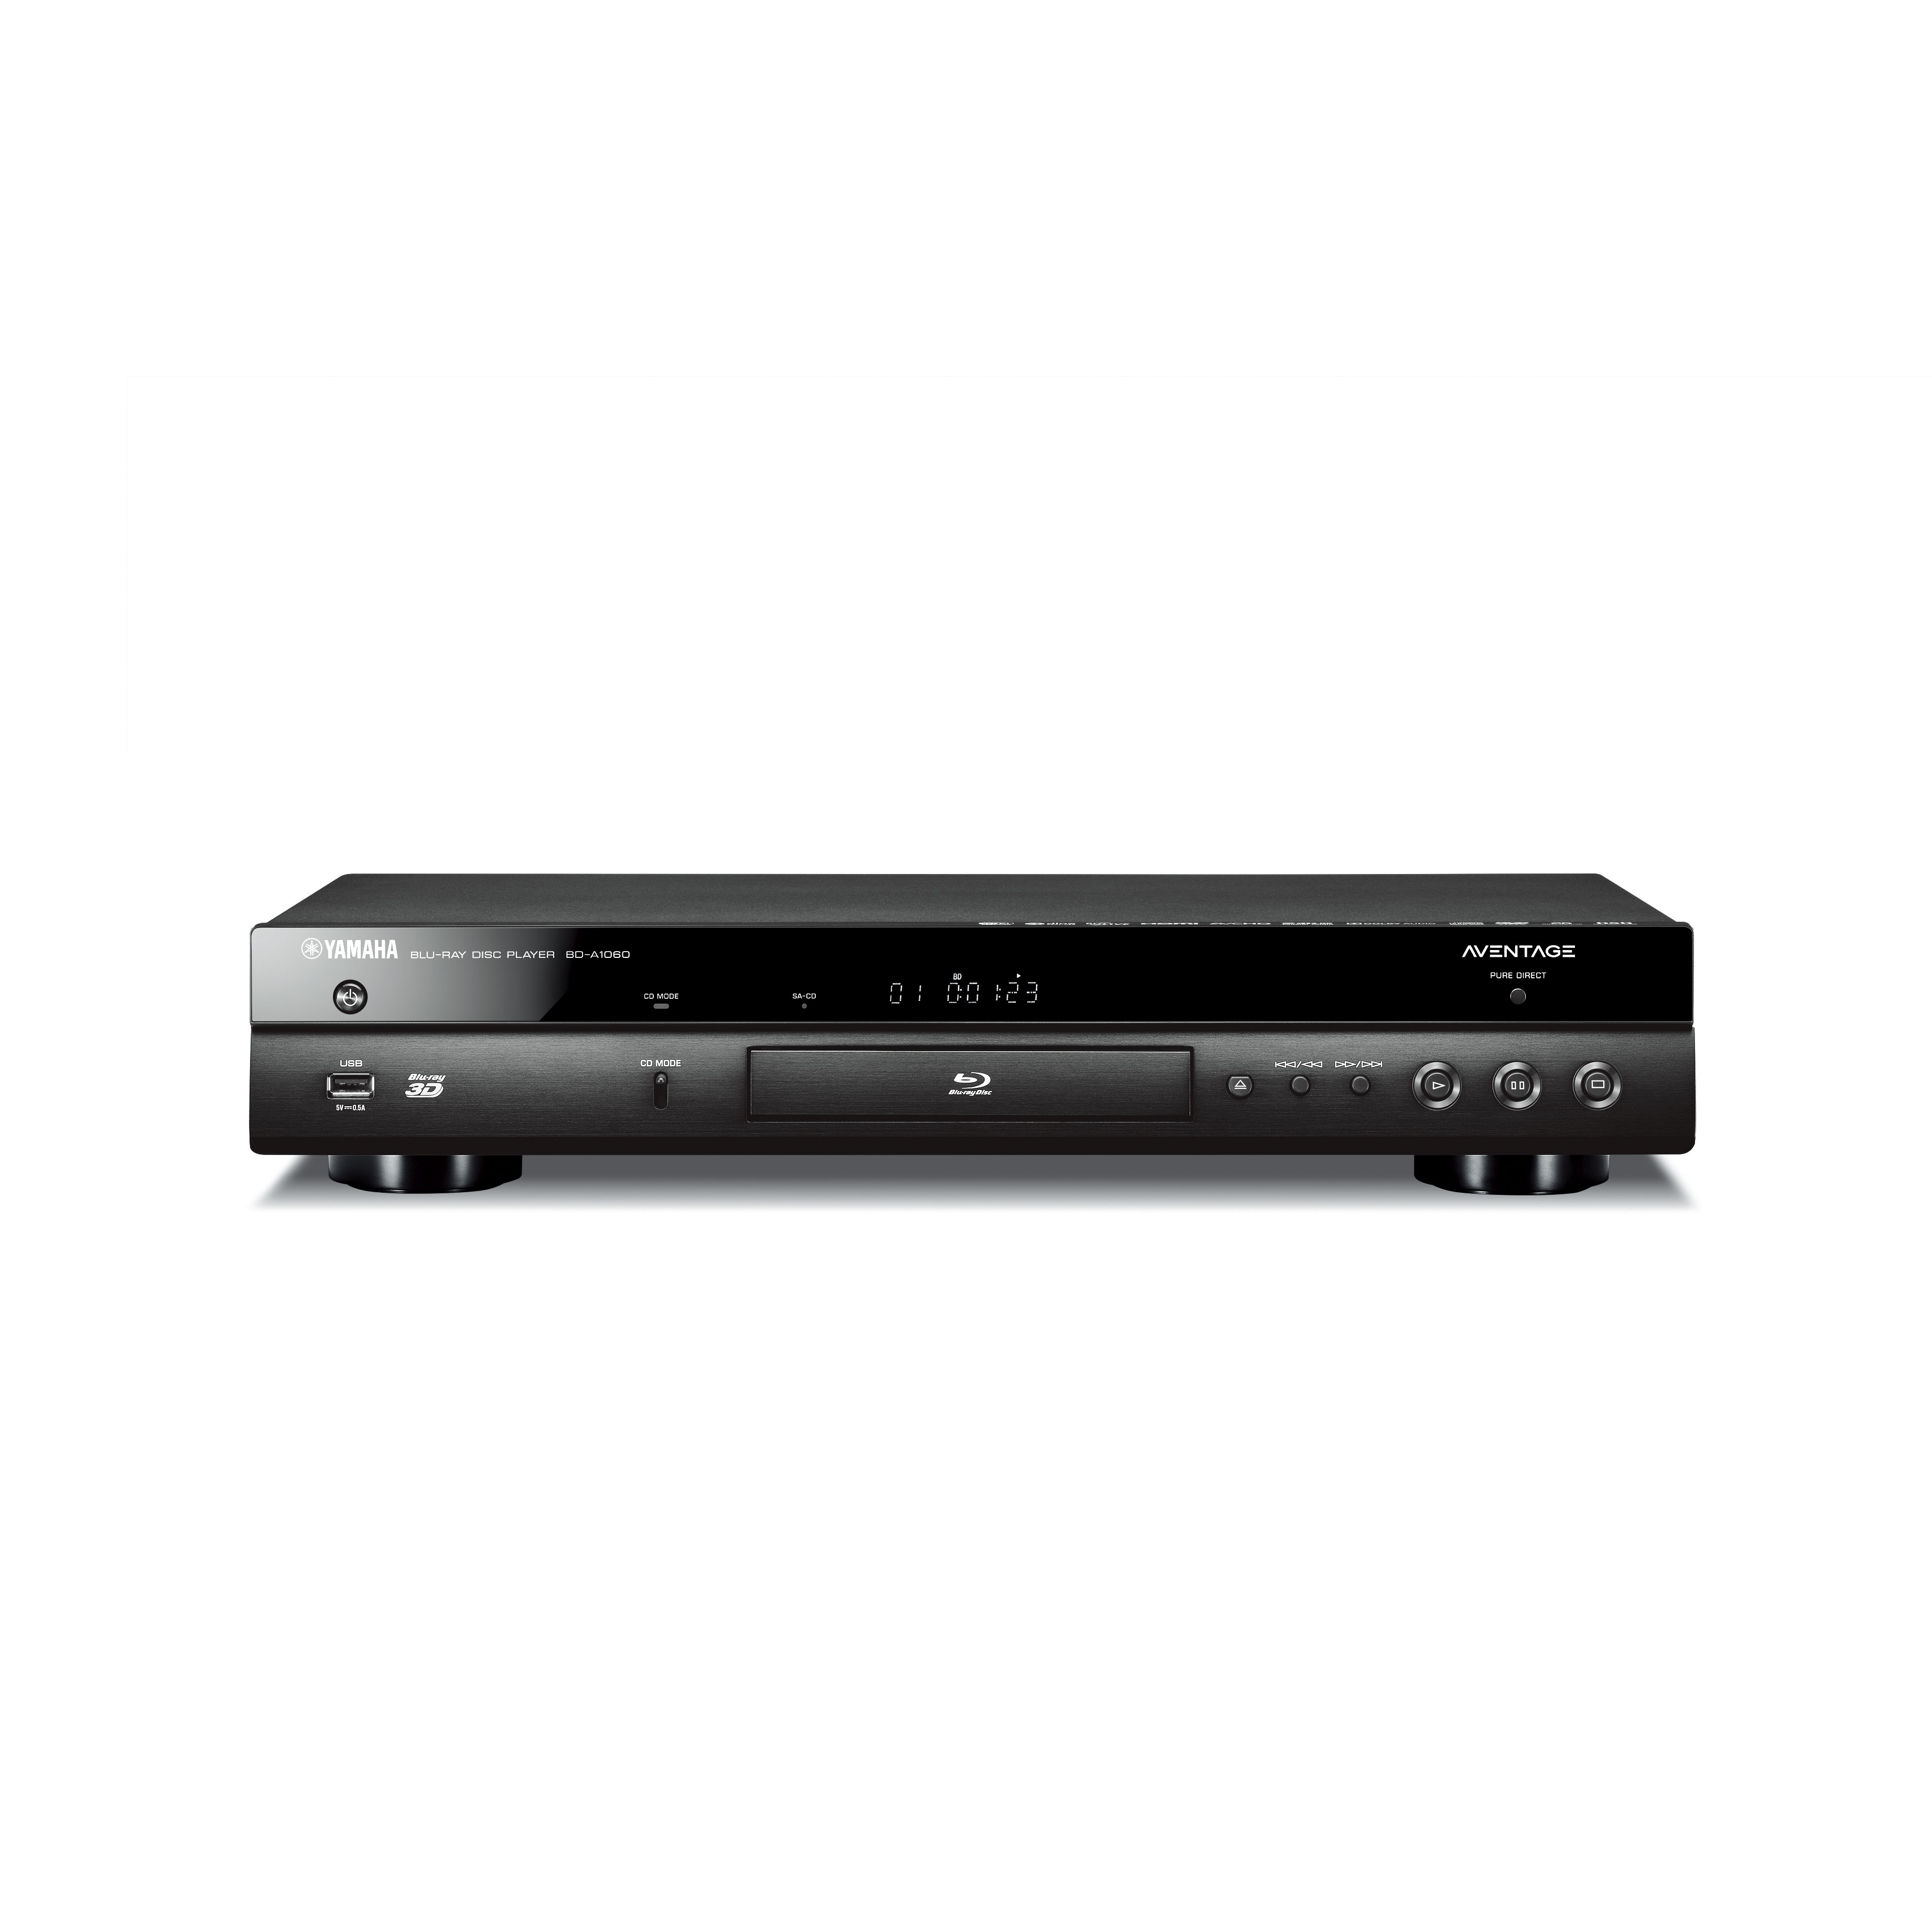 BD-A1060 - Features - Blu-ray Disc™️ Players - Audio & Visual